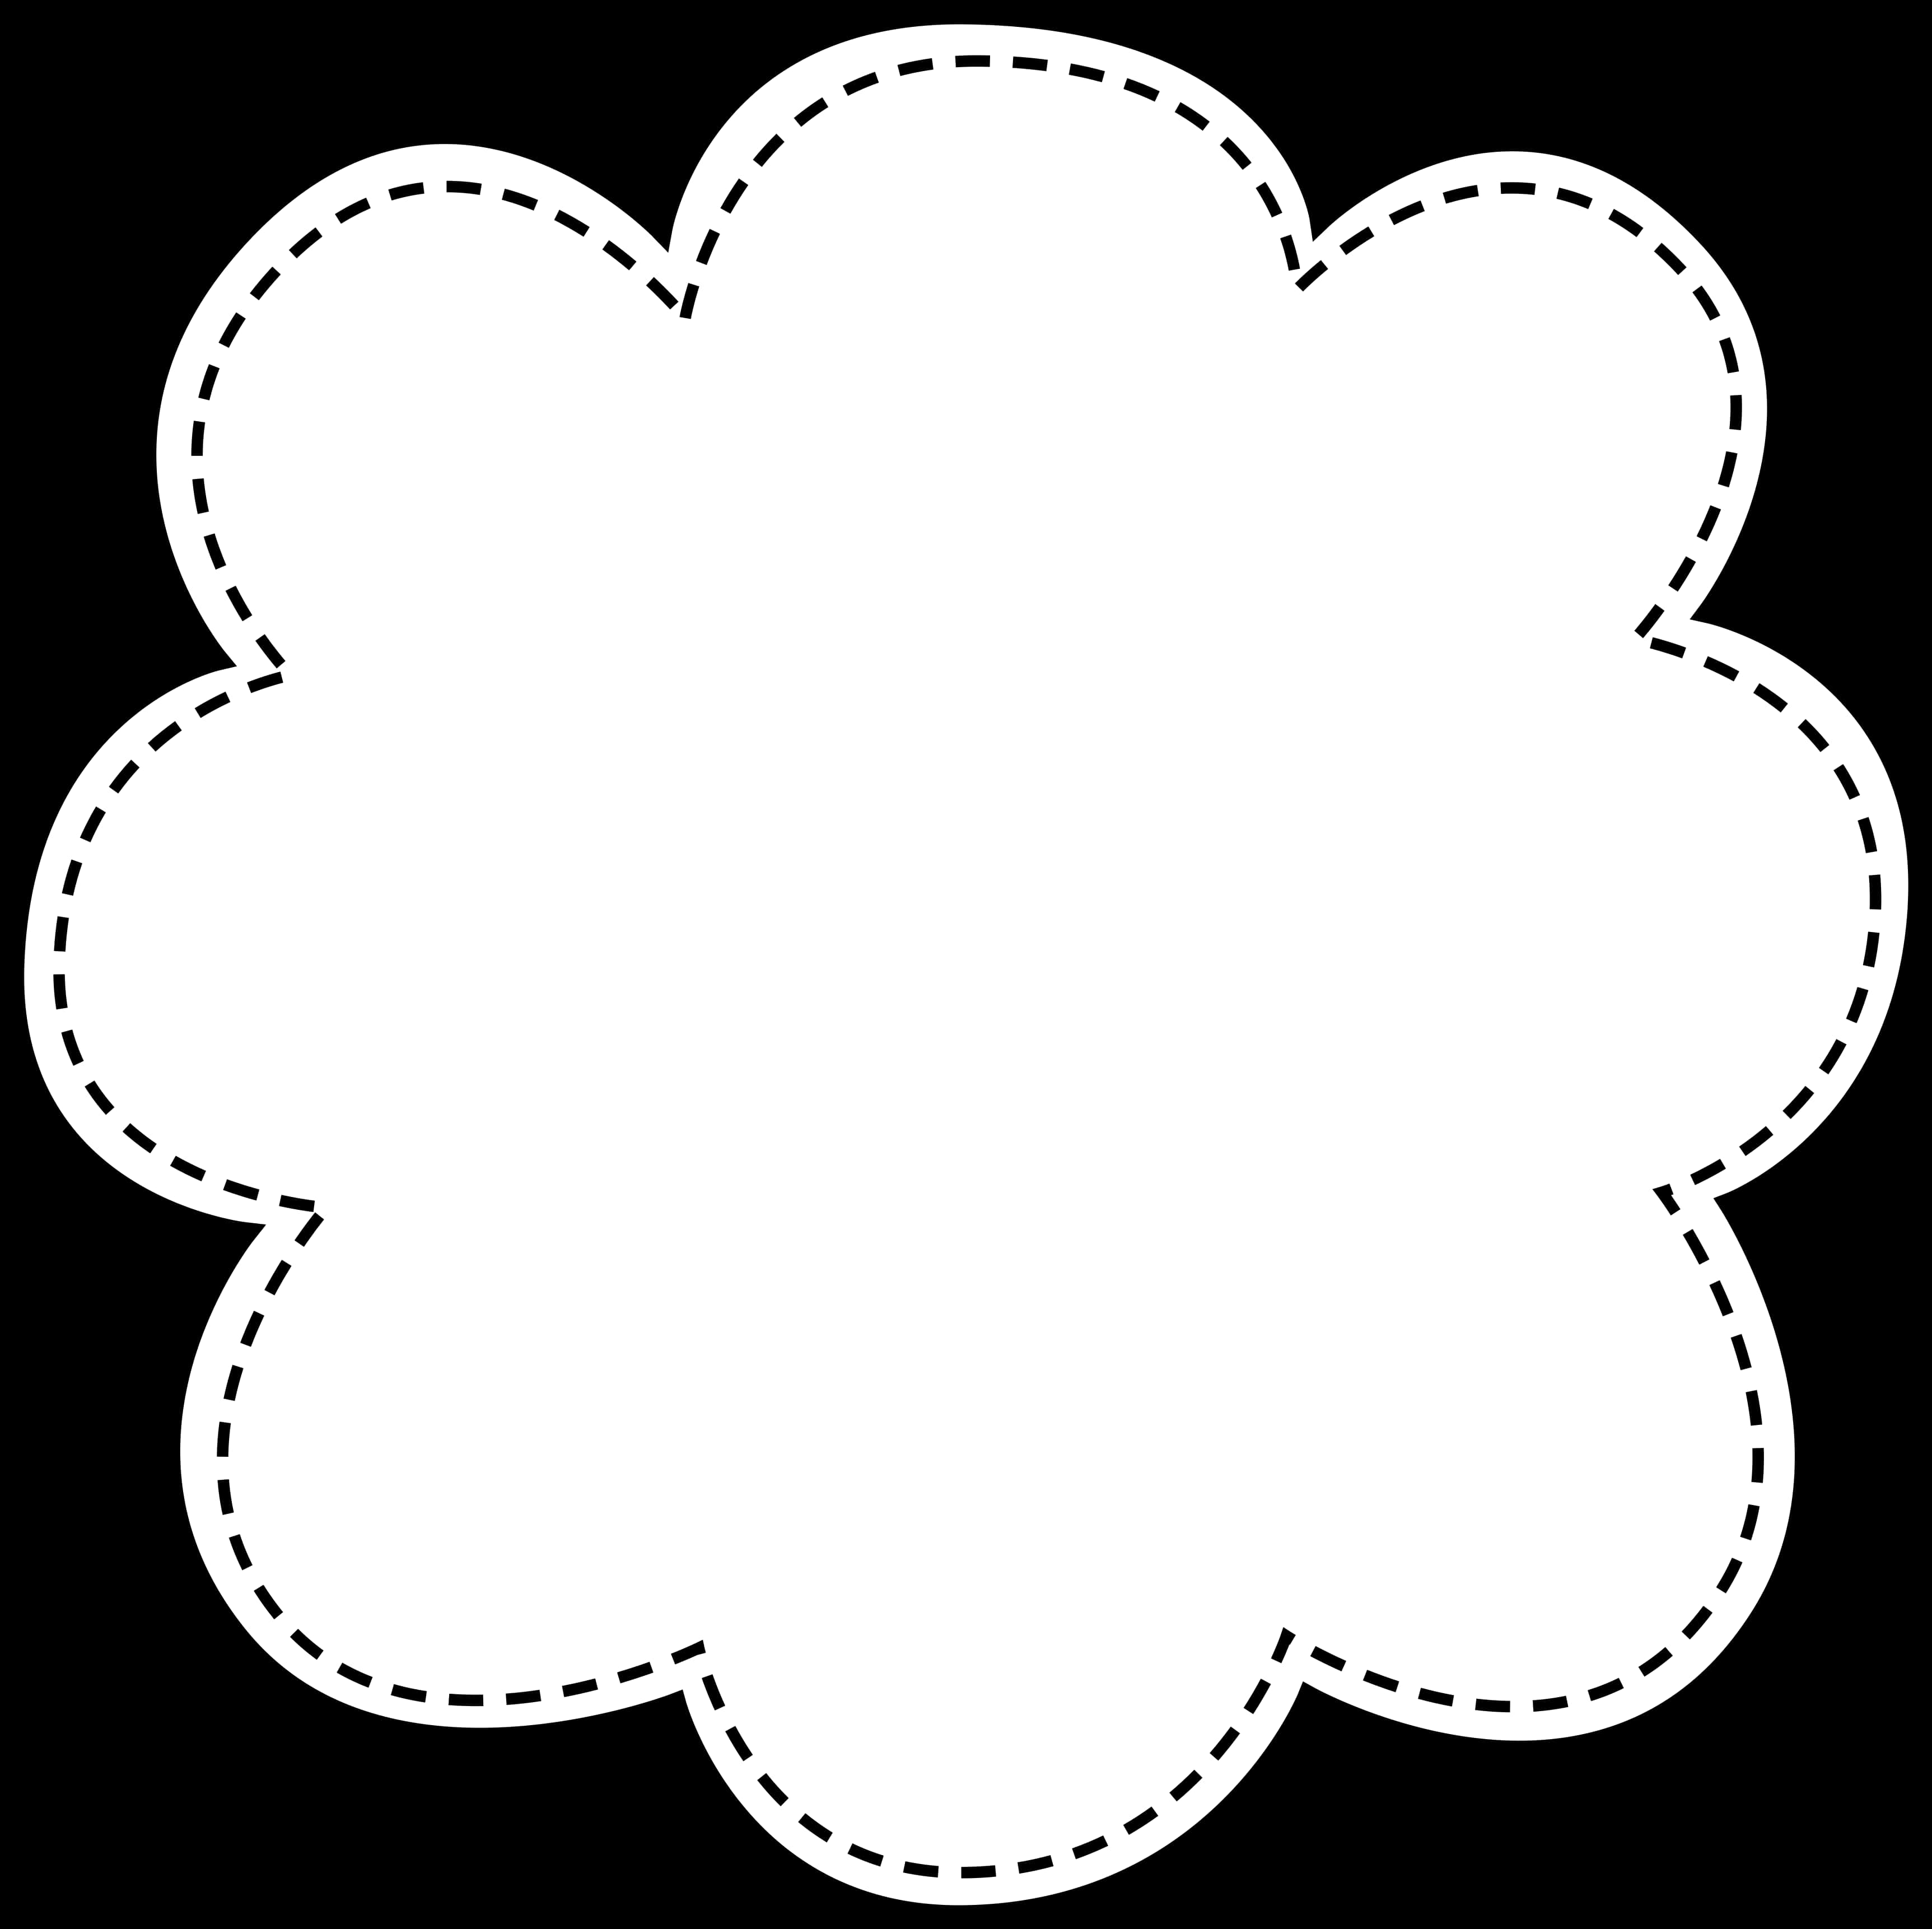 A White Flower Shaped Object With Dotted Lines